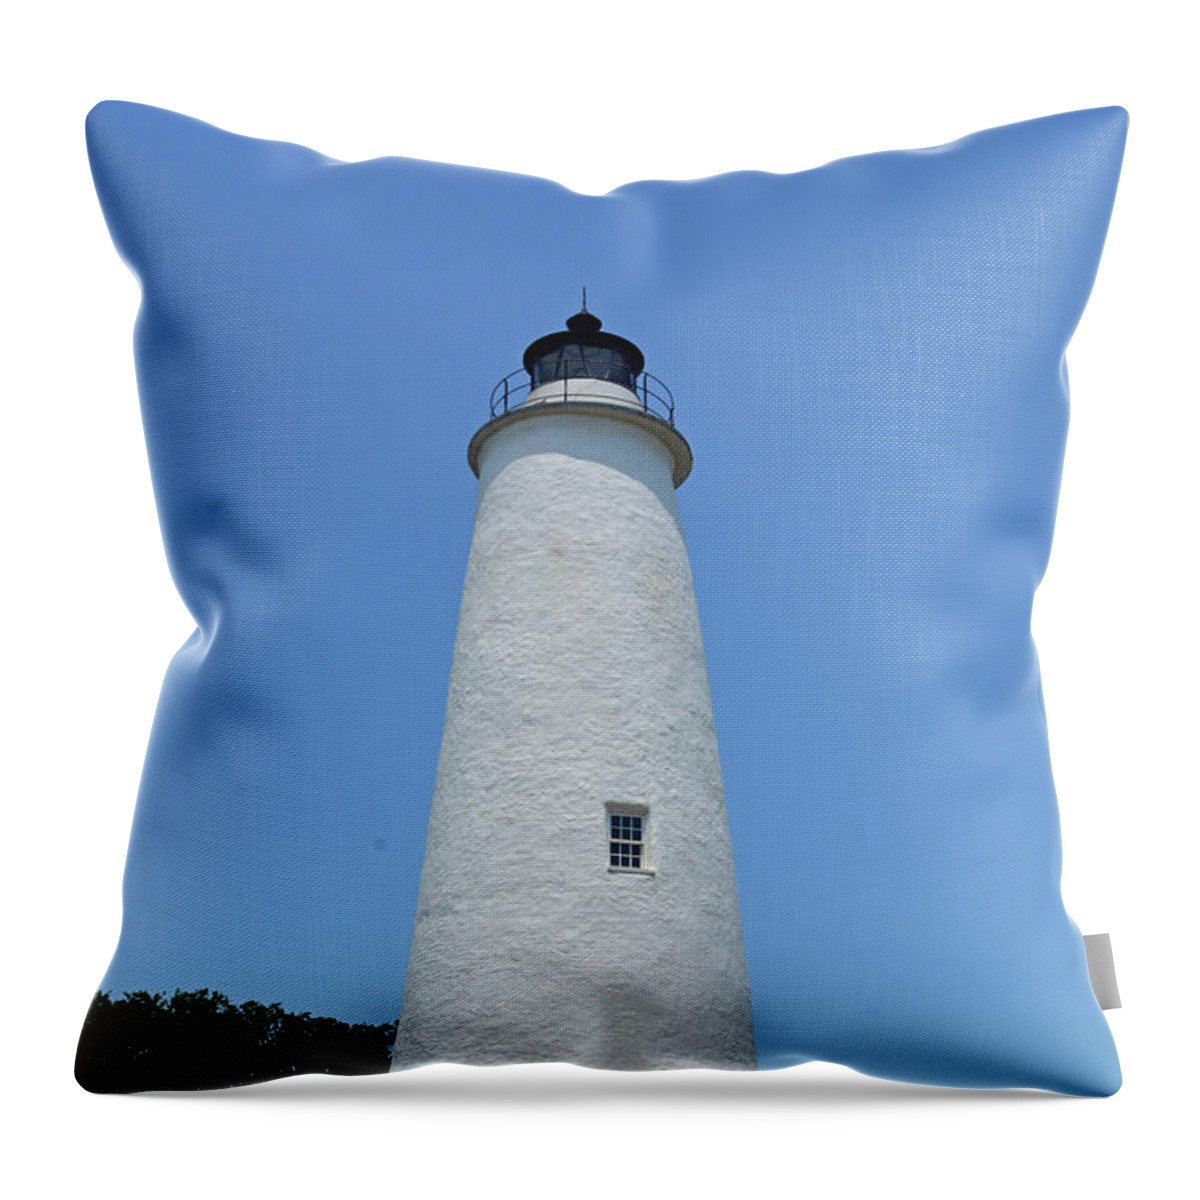 Ocracoke Lighthouse Throw Pillow featuring the photograph Ocracoke Lighthouse by Jimmie Bartlett